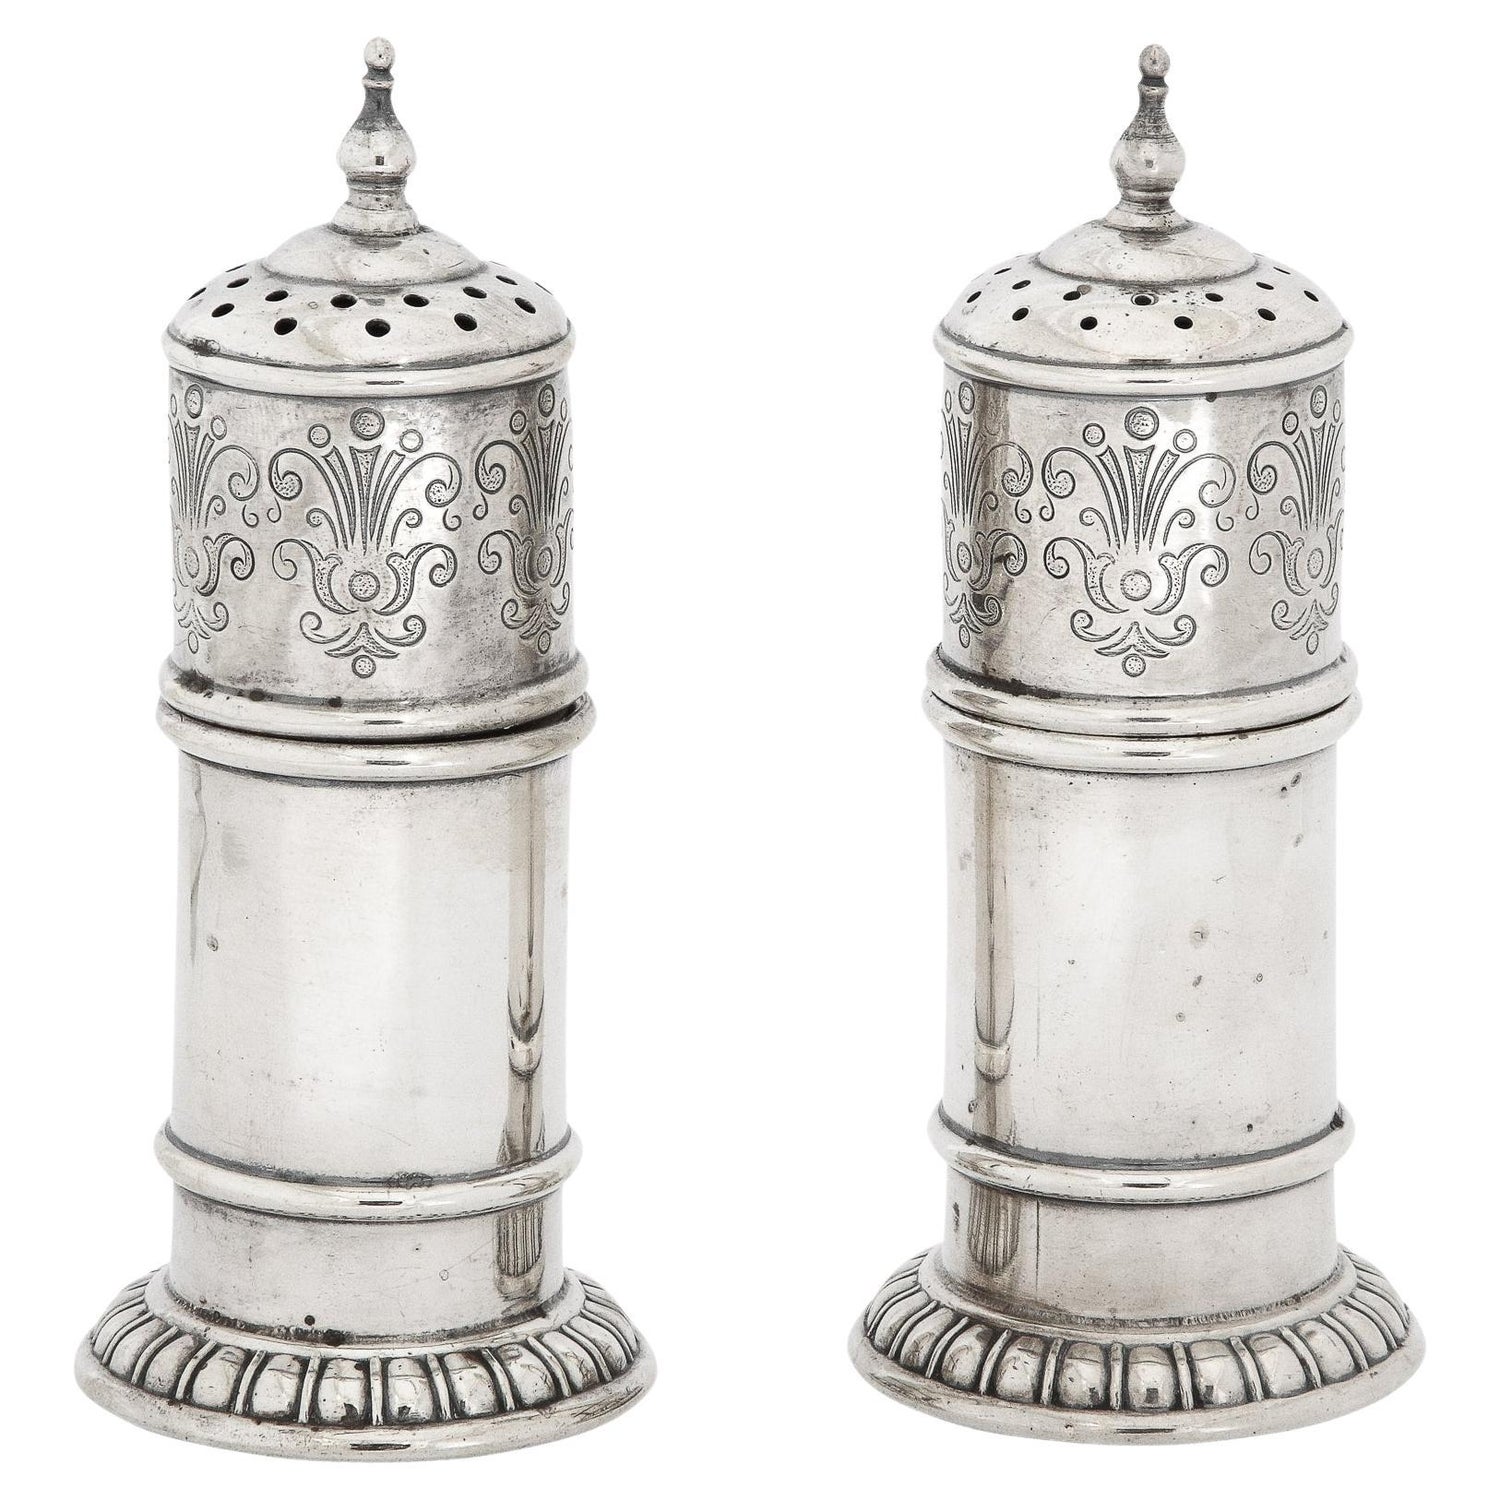 https://a.1stdibscdn.com/pair-of-art-deco-sterling-salt-and-pepper-shakers-by-rogers-lunt-and-bowlen-co-for-sale/f_7934/f_362695421695327300295/f_36269542_1695327300866_bg_processed.jpg?width=1500